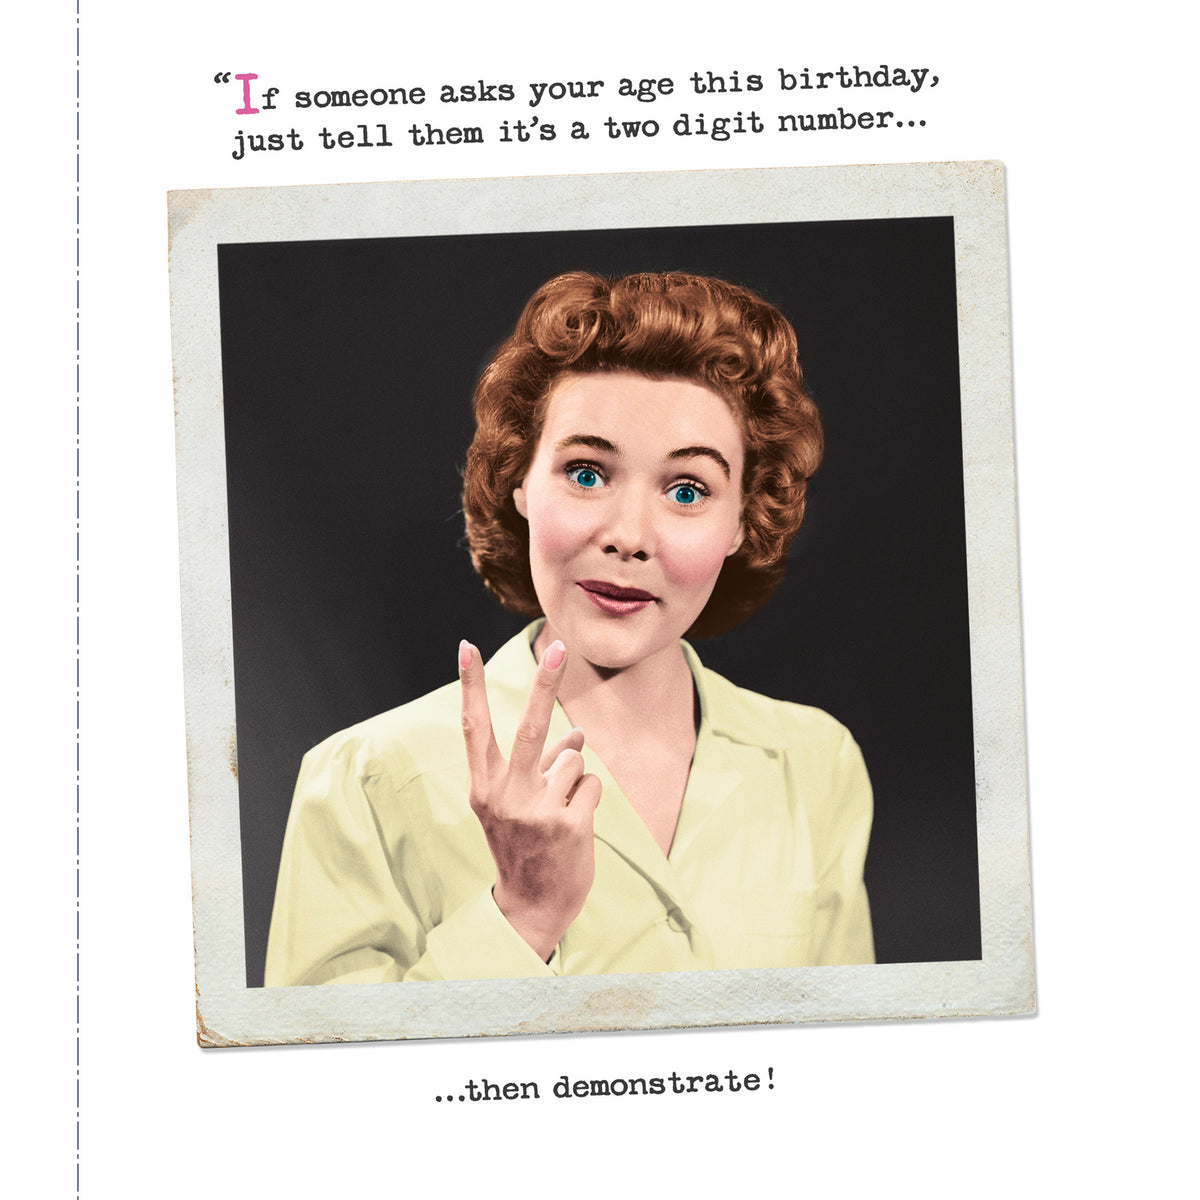 Two Digit Humour Birthday Greetings Card